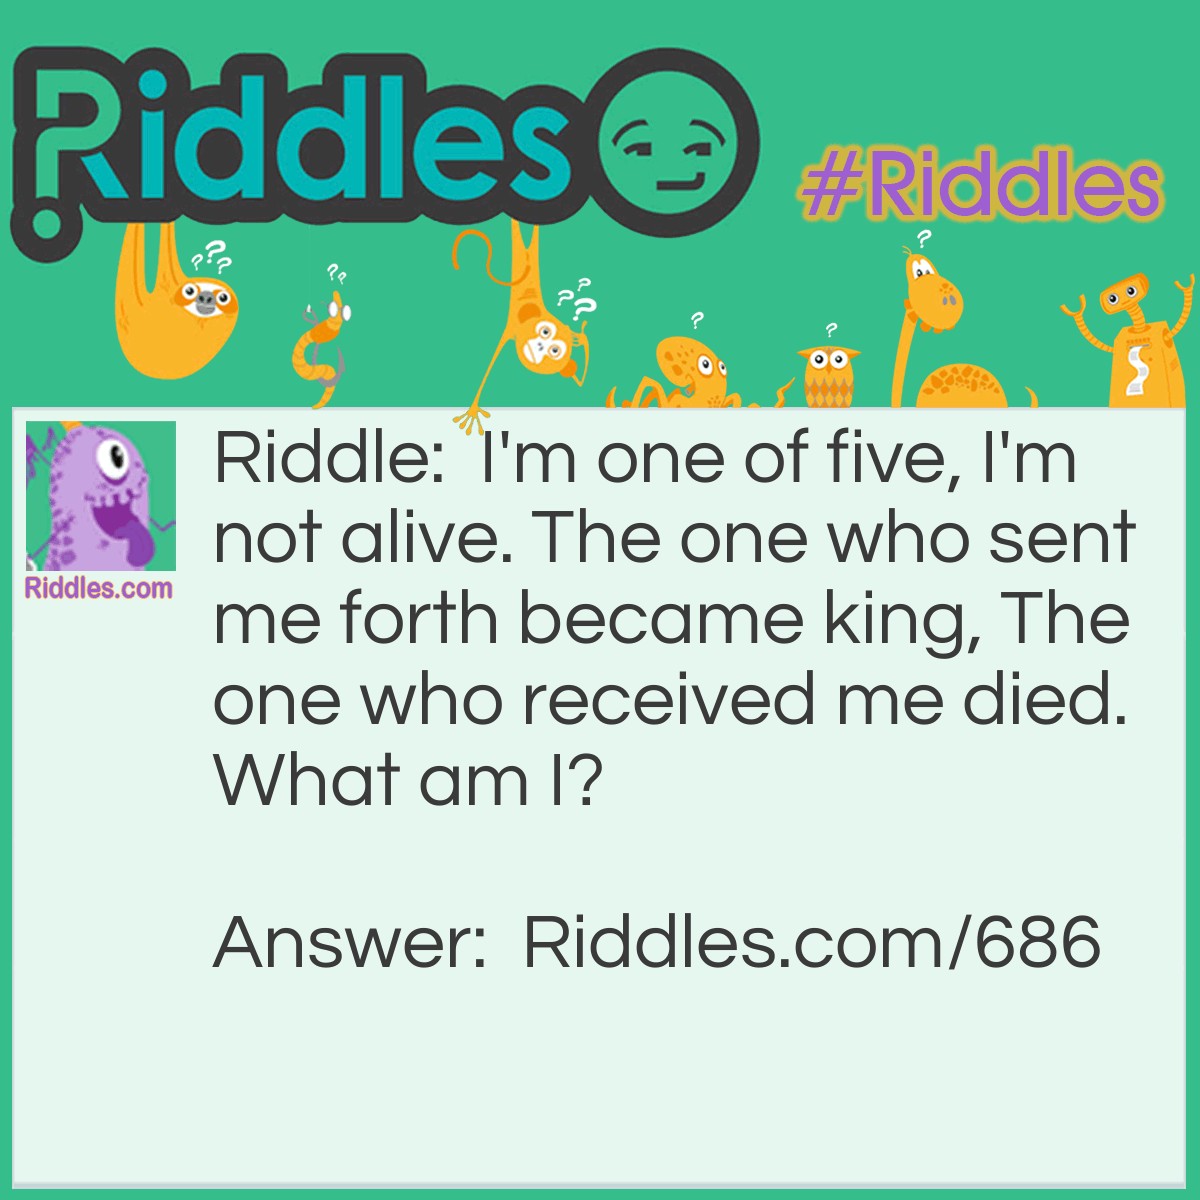 Riddle: I'm one of five, I'm not alive. The one who sent me forth became king, The one who received me died.
What am I? Answer: A Stone from the popular Biblical story, David had five stones. He used one of the stones to kill Goliath.